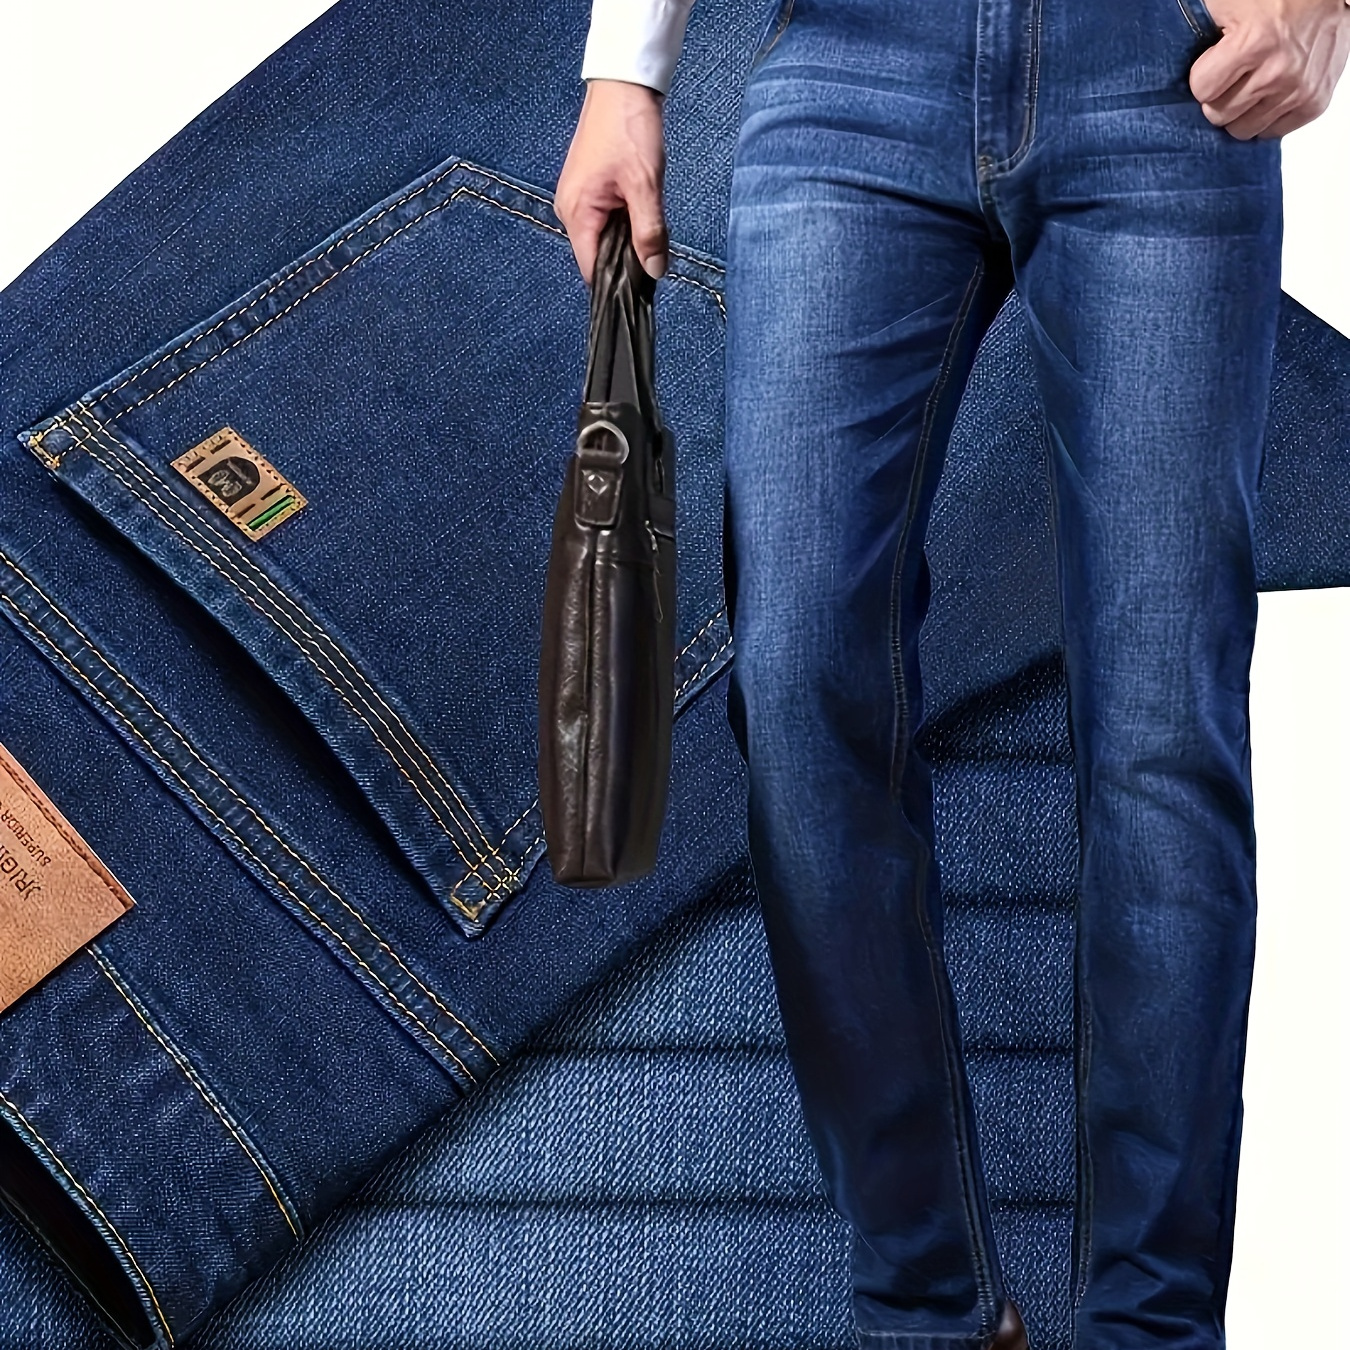 

Men's Solid Denim Pants With Pockets, Formal Cotton Blend Jeans For Outdoor Activities